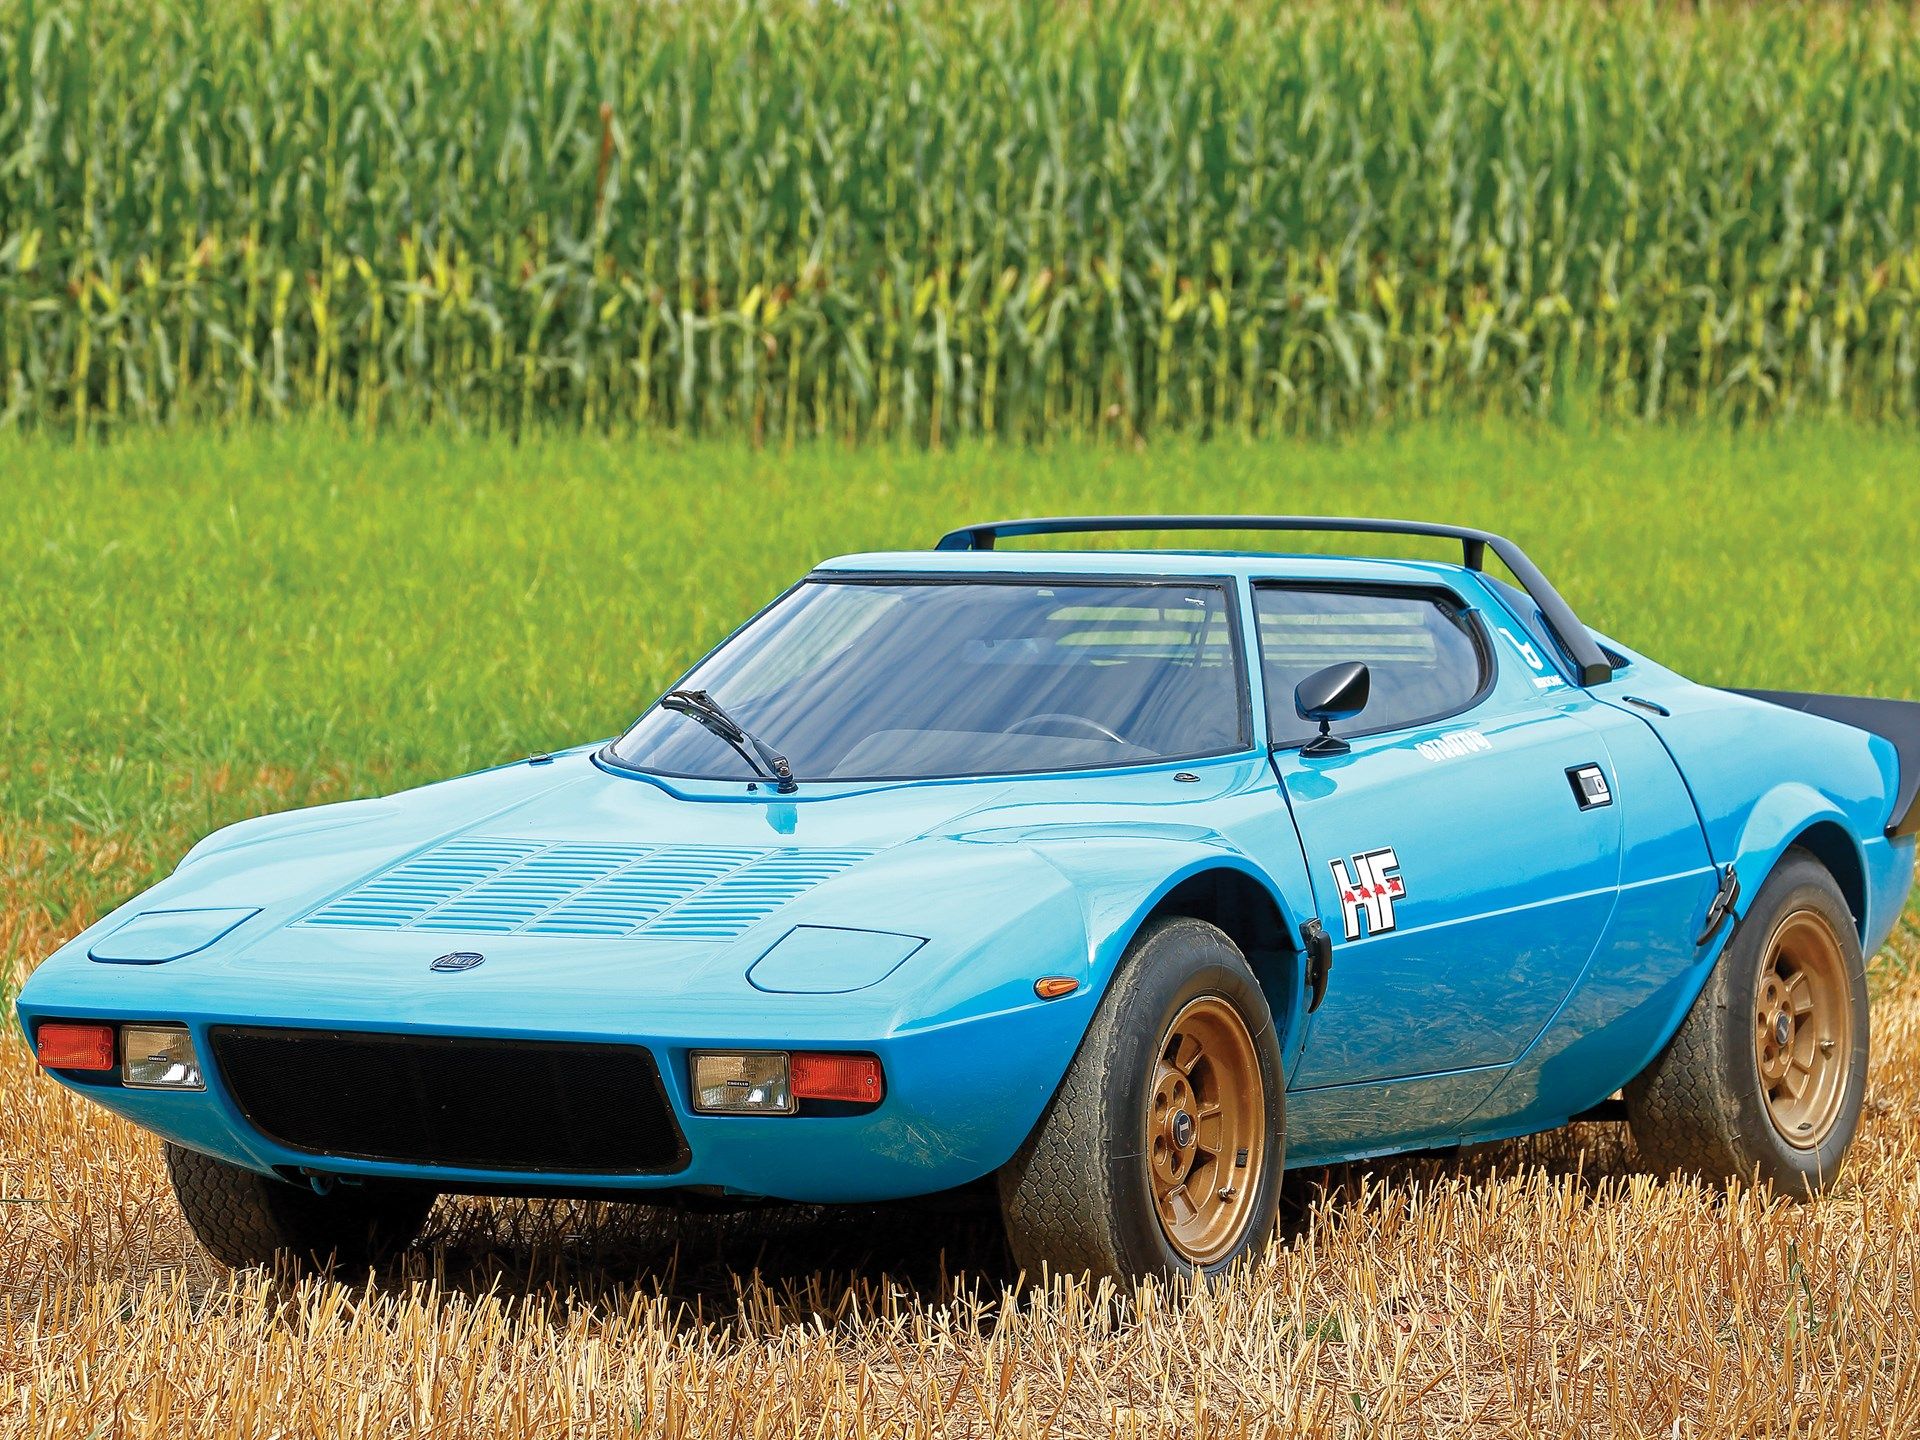 Lancia Stratos parked in a field